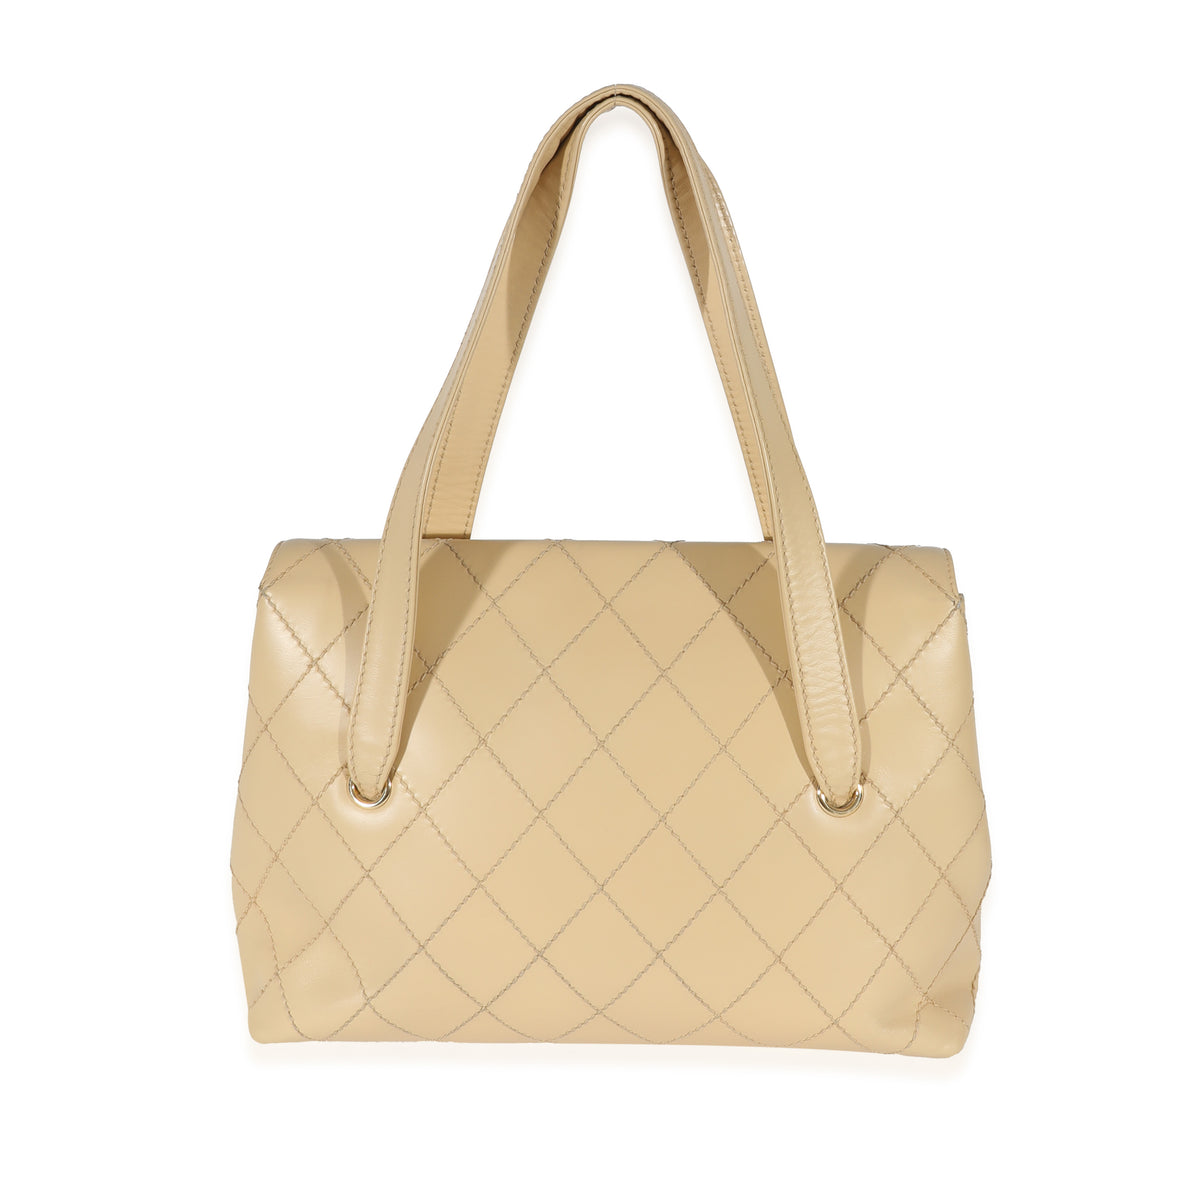 Chanel Vintage Beige Lambskin Whipstitch Quilted Tote